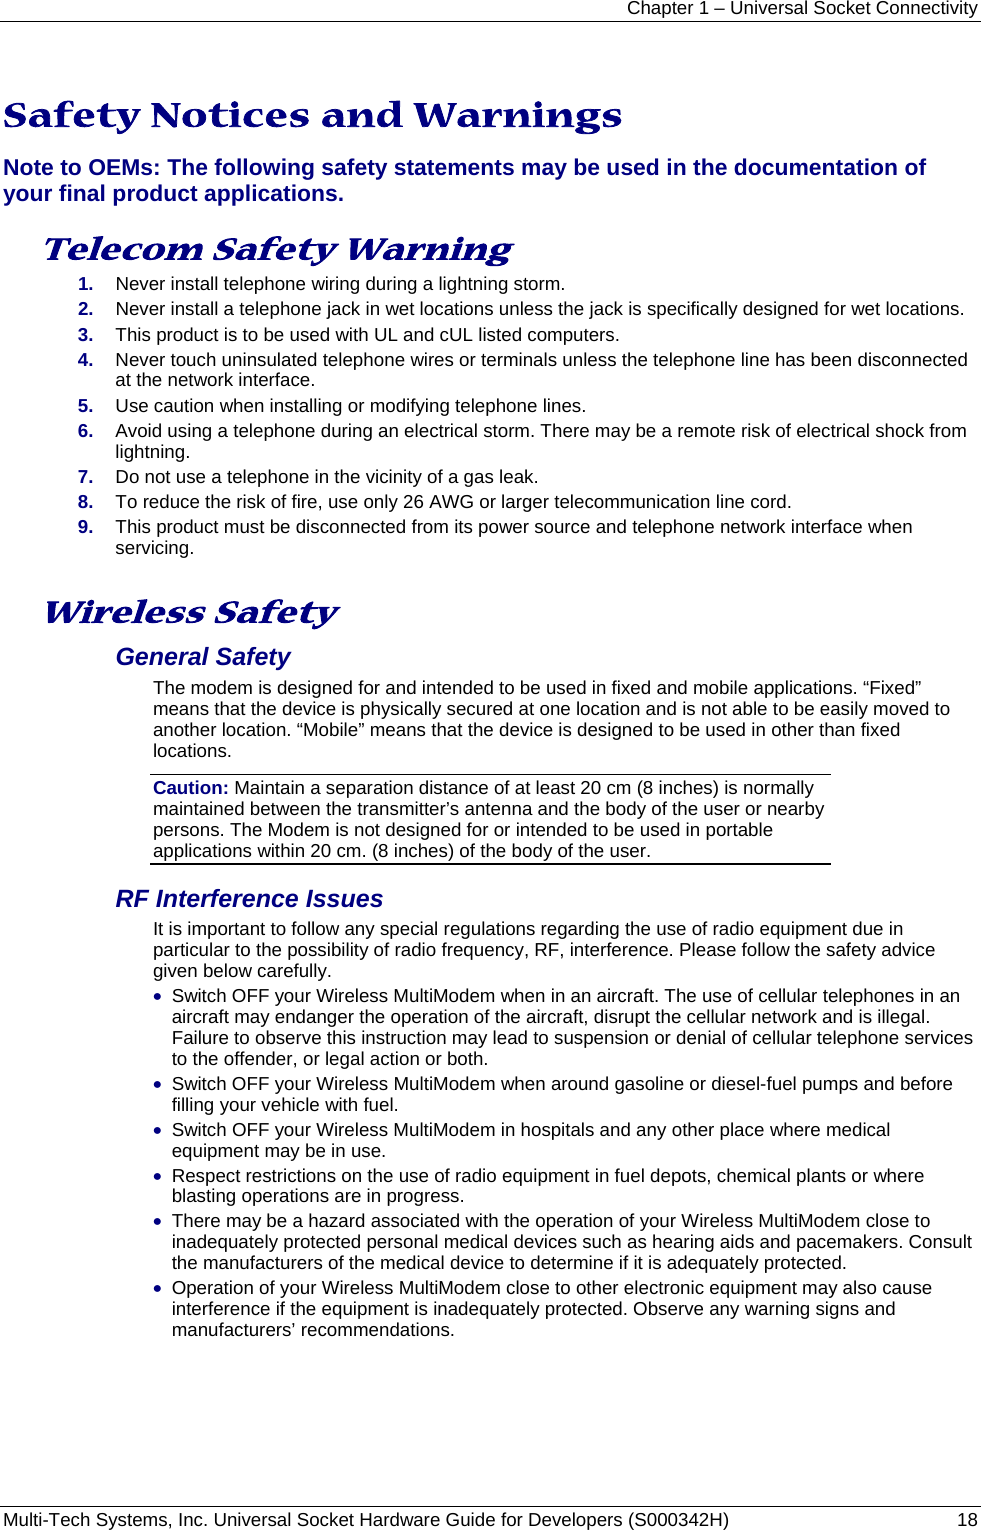 Chapter 1 – Universal Socket Connectivity Multi-Tech Systems, Inc. Universal Socket Hardware Guide for Developers (S000342H)  18   Safety Notices and Warnings Note to OEMs: The following safety statements may be used in the documentation of your final product applications.  Telecom Safety Warning  1.  Never install telephone wiring during a lightning storm. 2.  Never install a telephone jack in wet locations unless the jack is specifically designed for wet locations. 3.  This product is to be used with UL and cUL listed computers. 4.  Never touch uninsulated telephone wires or terminals unless the telephone line has been disconnected at the network interface. 5.  Use caution when installing or modifying telephone lines. 6.  Avoid using a telephone during an electrical storm. There may be a remote risk of electrical shock from lightning. 7.  Do not use a telephone in the vicinity of a gas leak. 8.  To reduce the risk of fire, use only 26 AWG or larger telecommunication line cord. 9.  This product must be disconnected from its power source and telephone network interface when servicing.  Wireless Safety  General Safety The modem is designed for and intended to be used in fixed and mobile applications. “Fixed” means that the device is physically secured at one location and is not able to be easily moved to another location. “Mobile” means that the device is designed to be used in other than fixed locations. Caution: Maintain a separation distance of at least 20 cm (8 inches) is normally maintained between the transmitter’s antenna and the body of the user or nearby persons. The Modem is not designed for or intended to be used in portable applications within 20 cm. (8 inches) of the body of the user. RF Interference Issues It is important to follow any special regulations regarding the use of radio equipment due in particular to the possibility of radio frequency, RF, interference. Please follow the safety advice given below carefully. • Switch OFF your Wireless MultiModem when in an aircraft. The use of cellular telephones in an aircraft may endanger the operation of the aircraft, disrupt the cellular network and is illegal. Failure to observe this instruction may lead to suspension or denial of cellular telephone services to the offender, or legal action or both. • Switch OFF your Wireless MultiModem when around gasoline or diesel-fuel pumps and before filling your vehicle with fuel. • Switch OFF your Wireless MultiModem in hospitals and any other place where medical equipment may be in use. • Respect restrictions on the use of radio equipment in fuel depots, chemical plants or where blasting operations are in progress. • There may be a hazard associated with the operation of your Wireless MultiModem close to inadequately protected personal medical devices such as hearing aids and pacemakers. Consult the manufacturers of the medical device to determine if it is adequately protected. • Operation of your Wireless MultiModem close to other electronic equipment may also cause interference if the equipment is inadequately protected. Observe any warning signs and manufacturers’ recommendations. 